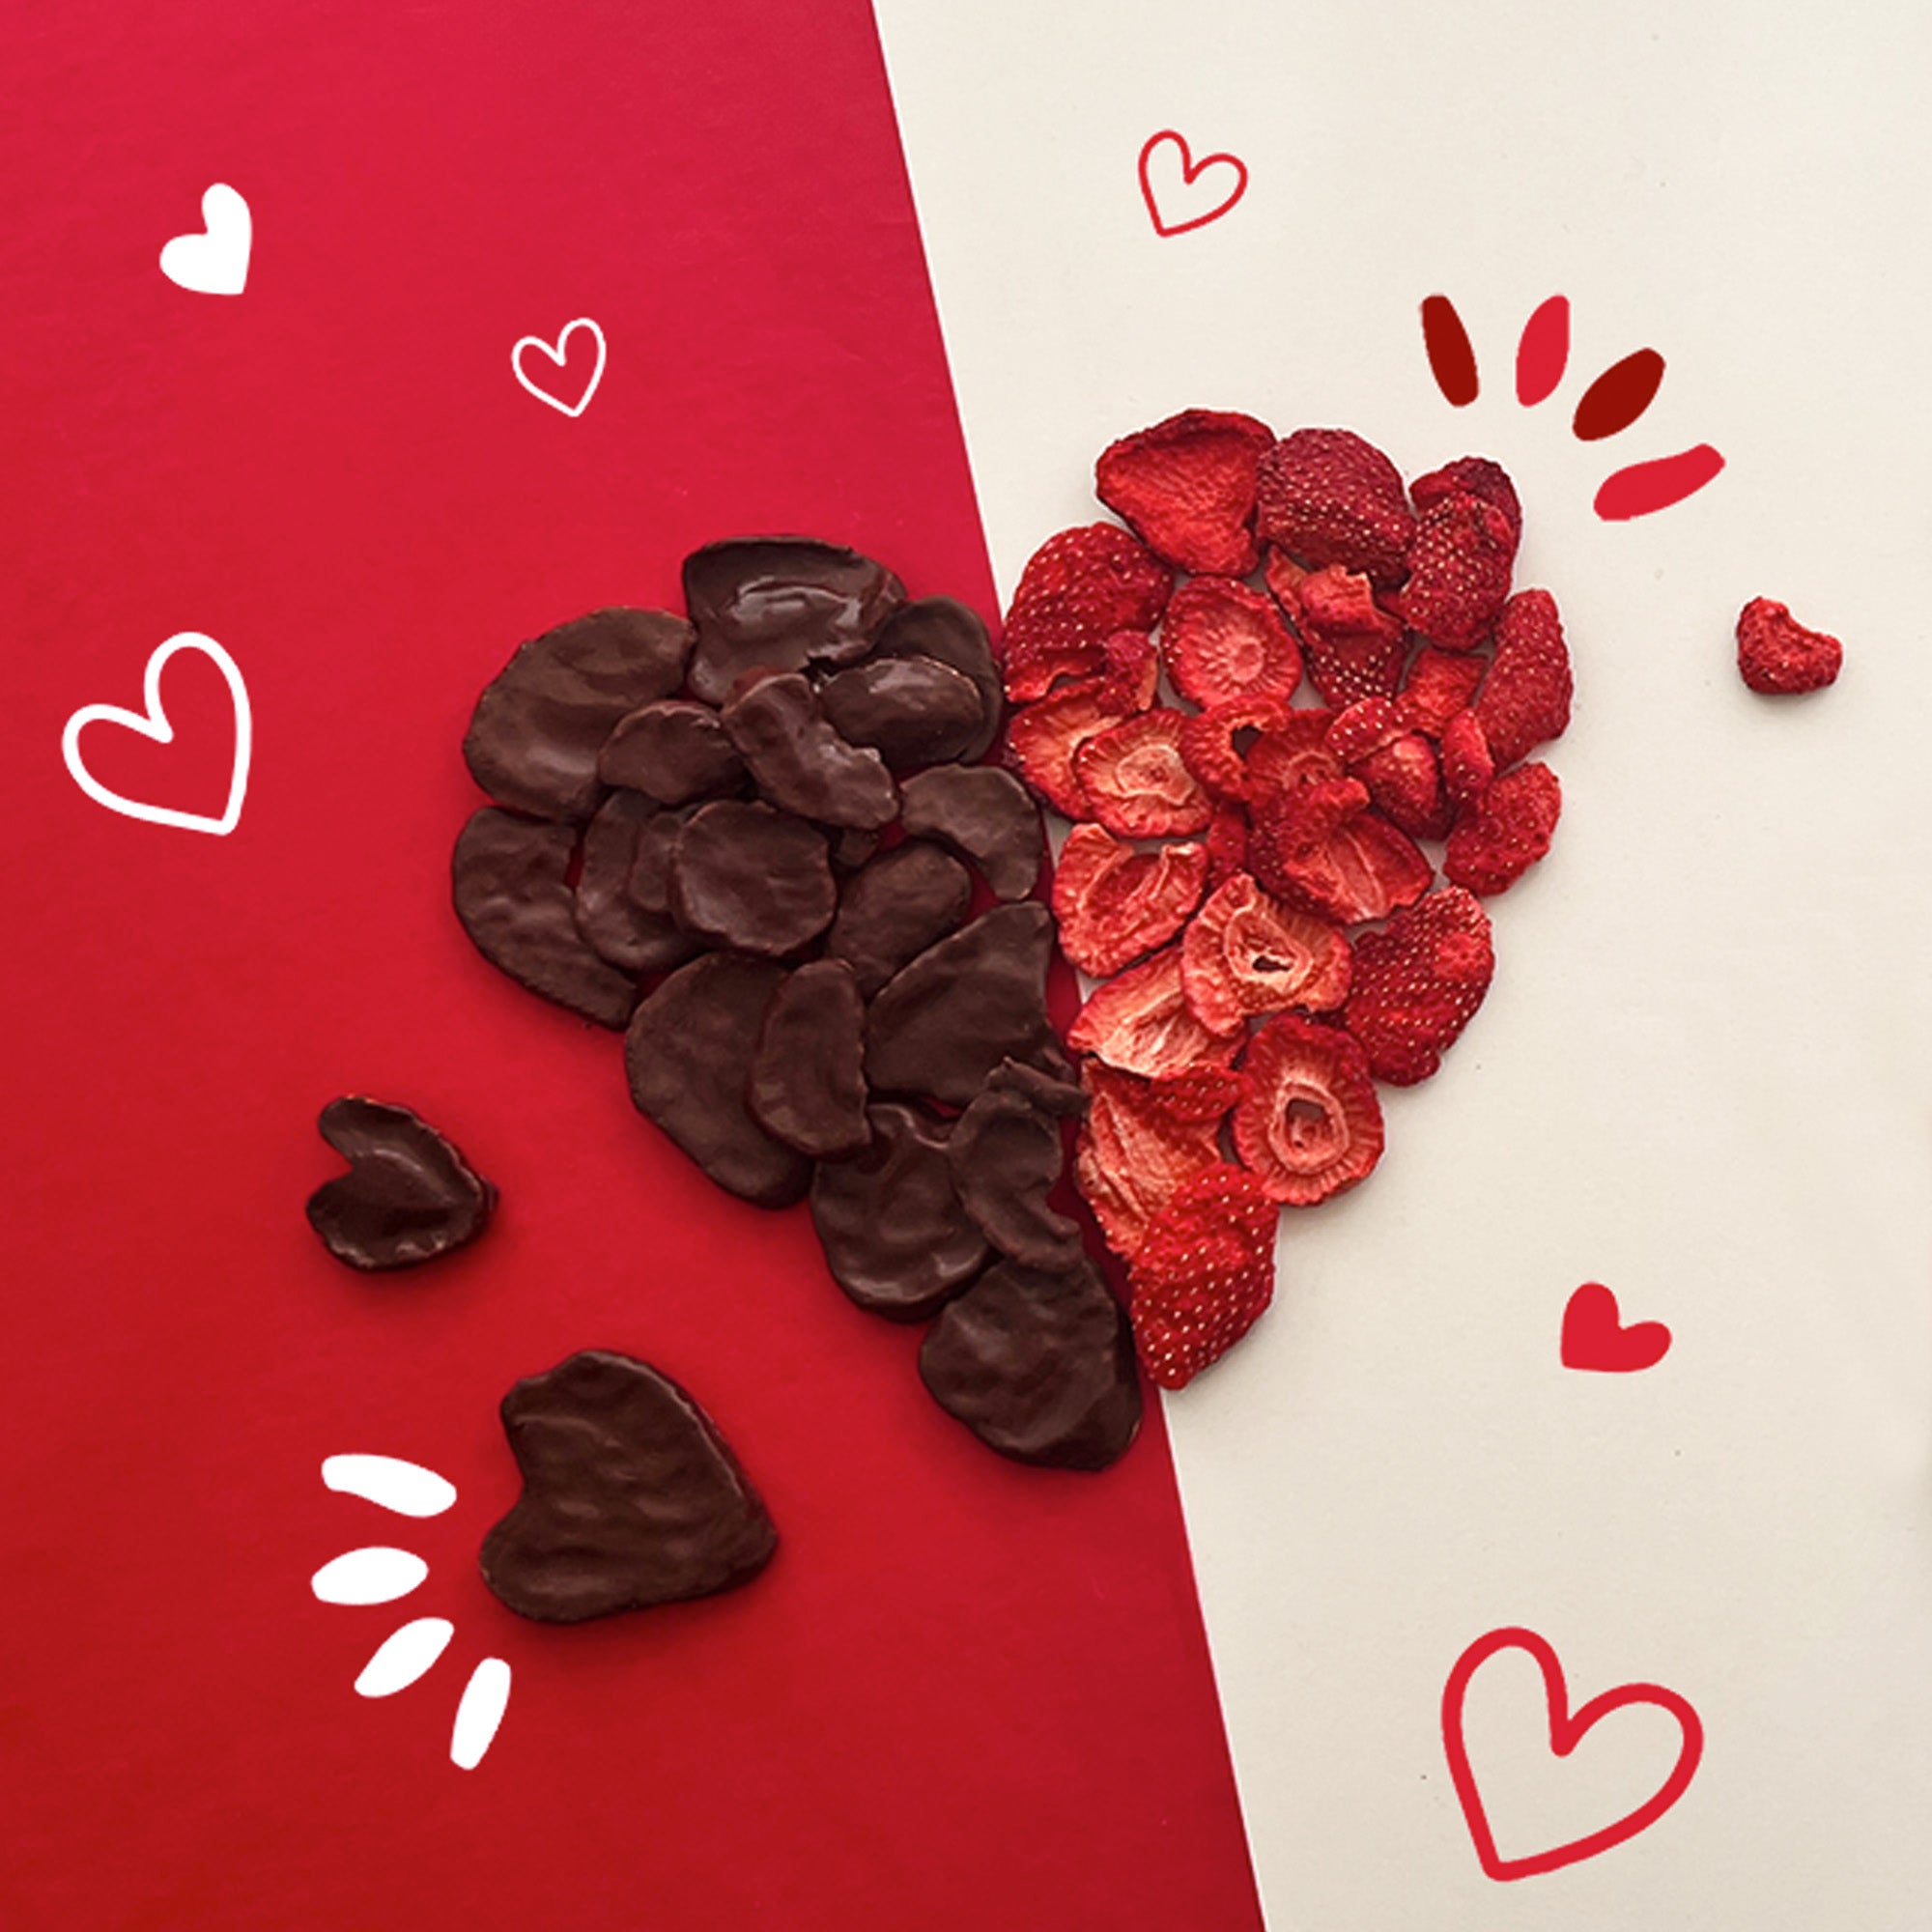 Chocolate-covered and freeze-dried strawberries heart